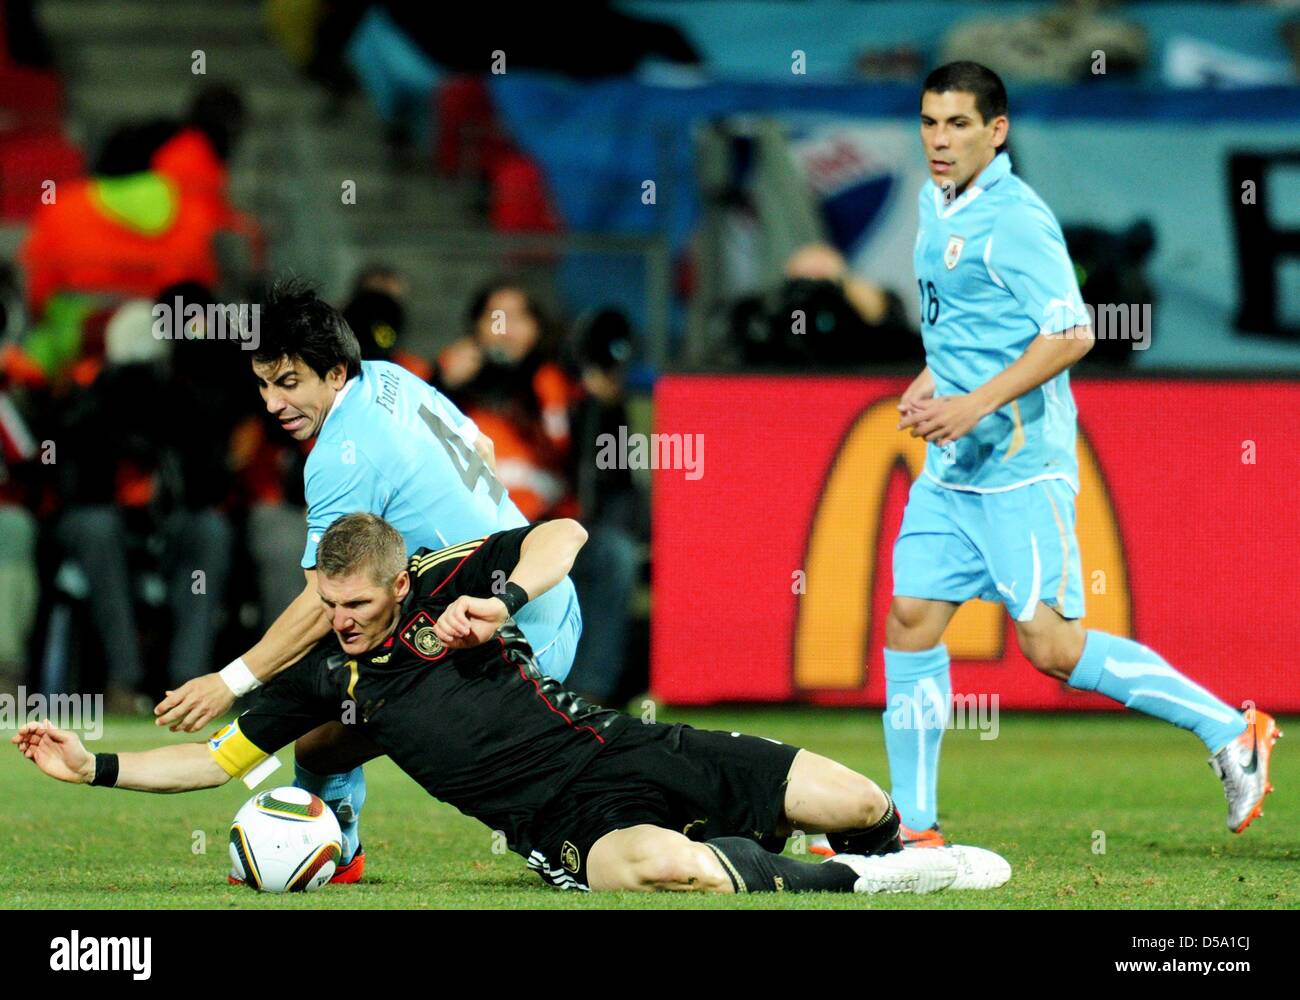 Jorge Fucile (L) of Uruguay vies with Bastian Schweinsteiger of Germany during the 2010 FIFA World Cup third place match between Uruguay and Germany at the Nelson Mandela Bay Stadium in Port Elizabeth, South Africa 10 July 2010. Photo: Bernd Weissbrod dpa - Please refer to http://dpaq.de/FIFA-WM2010-TC Stock Photo